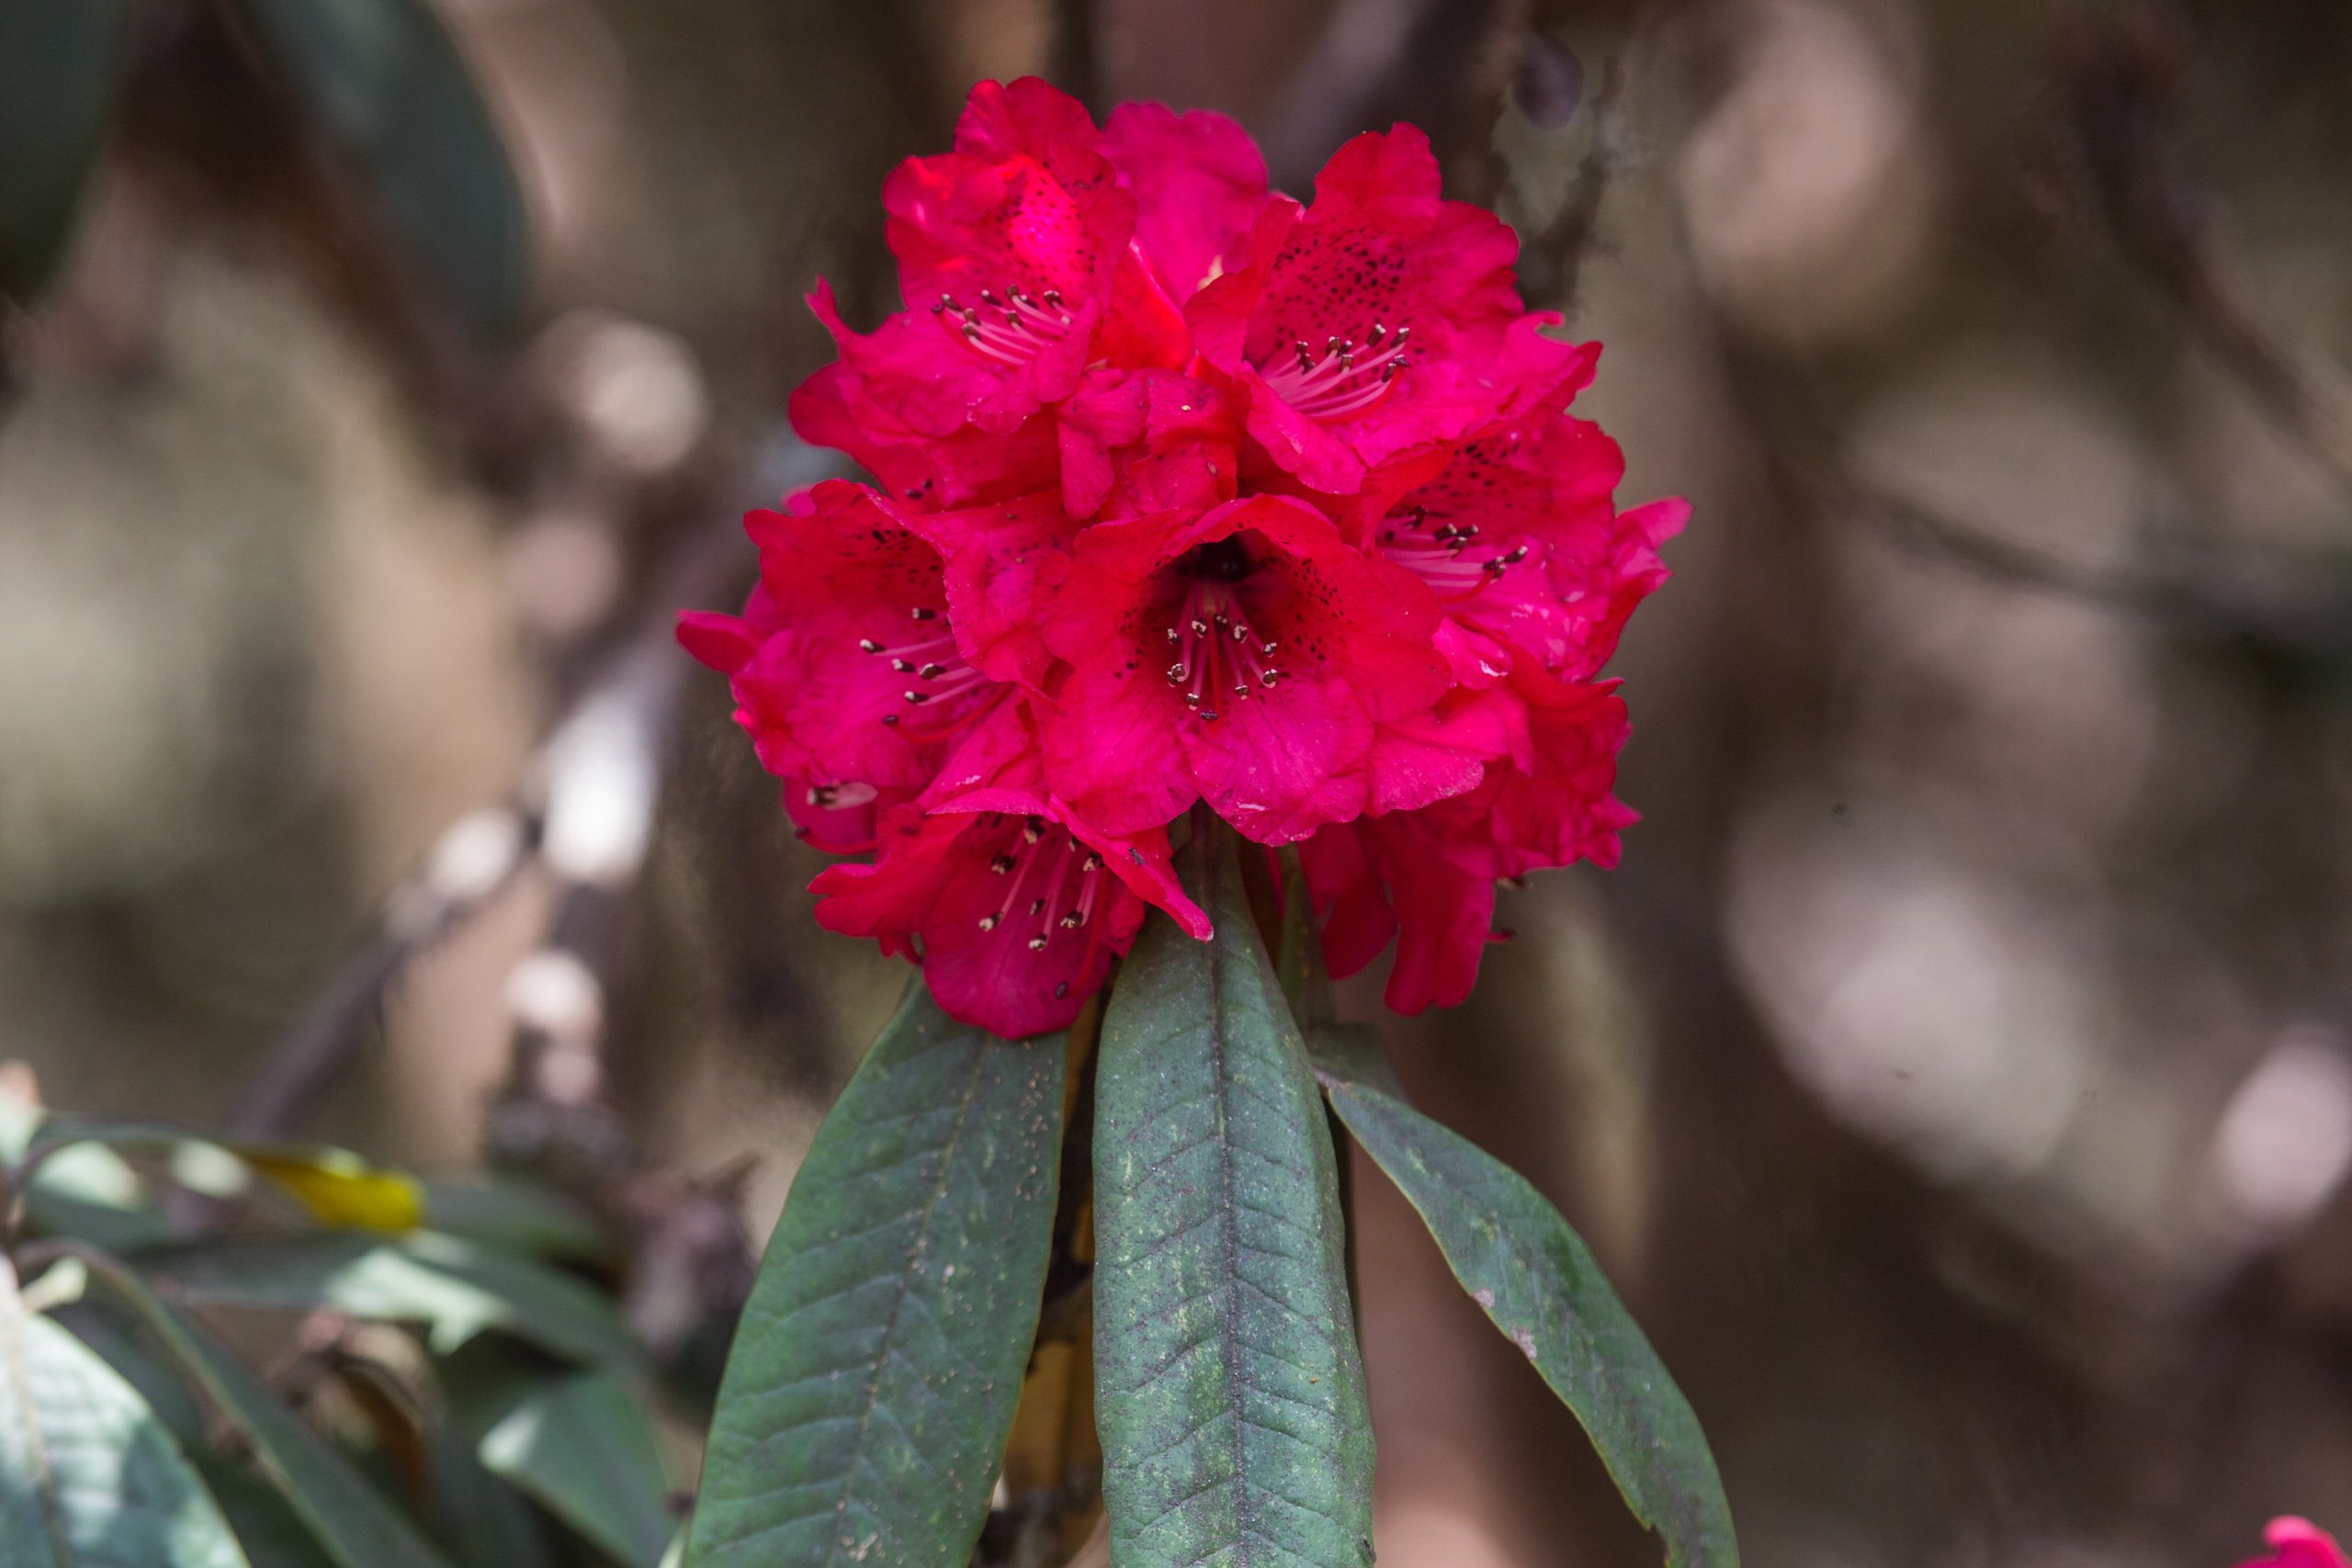 A rhododendron, the national flower of Nepal, in the Tinjure-Milke-Jaljale Rhododendron Conservation Area 